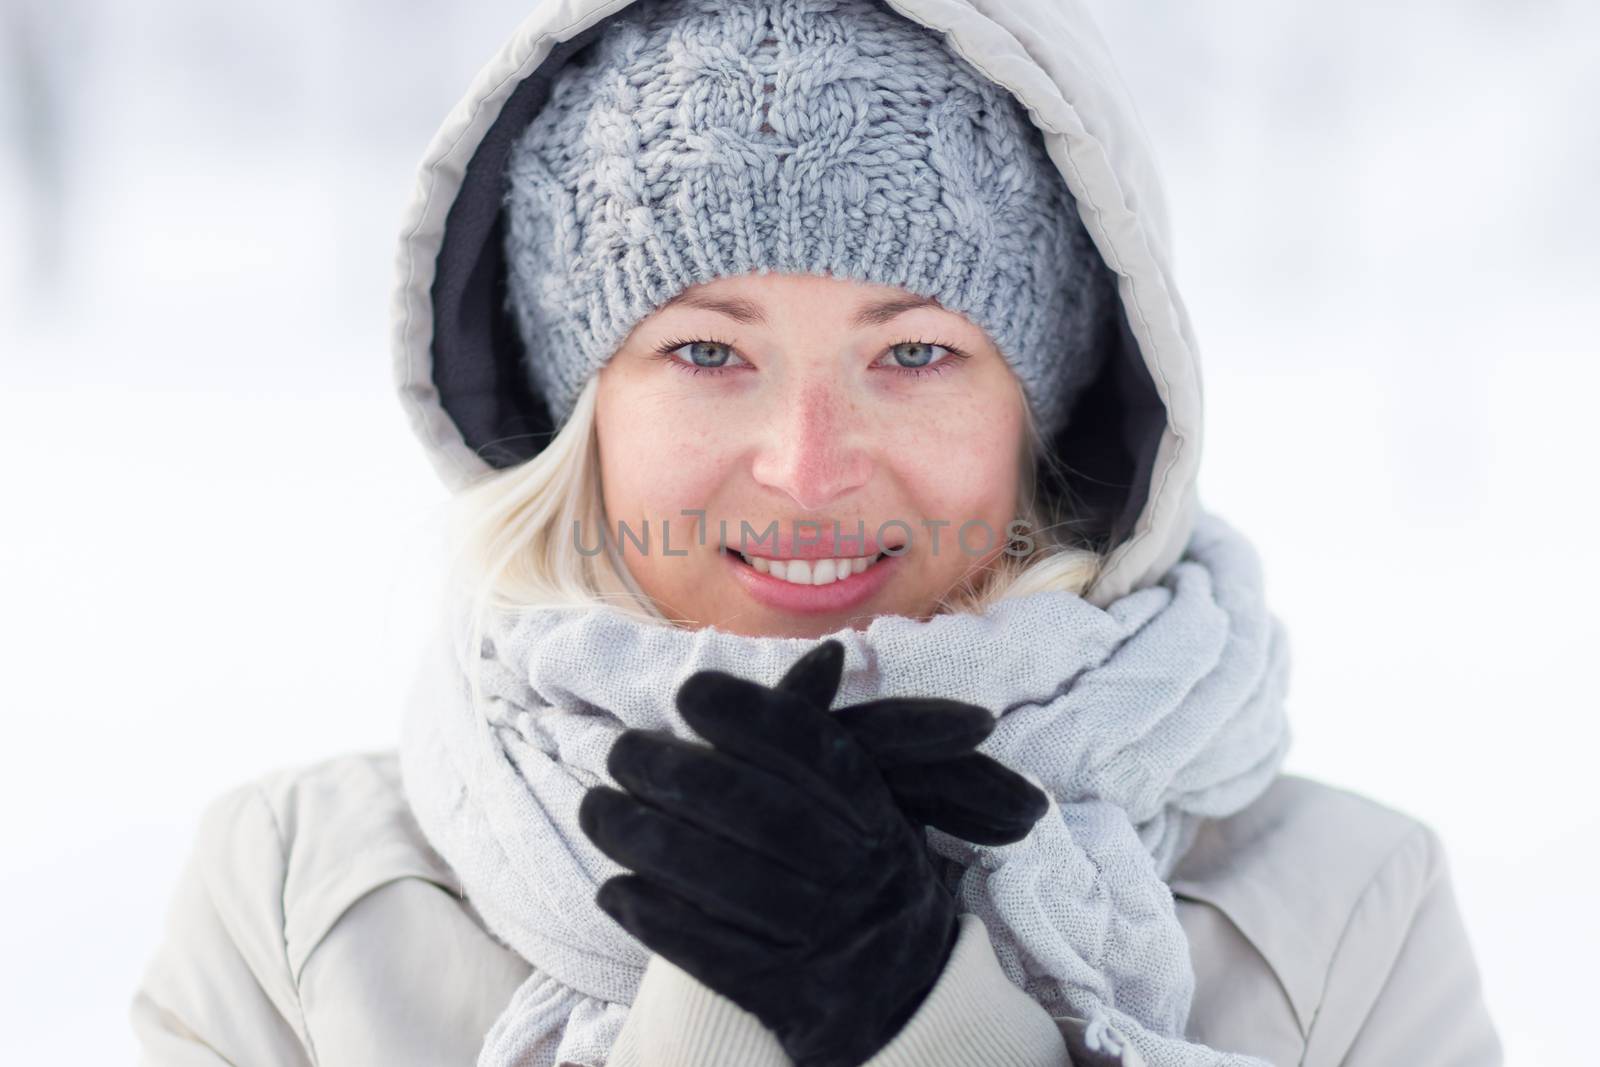 Girl wearing gloves, beeing cold outdoors in winter. Beautiful winter portrait of young woman in the winter snowy scenery.